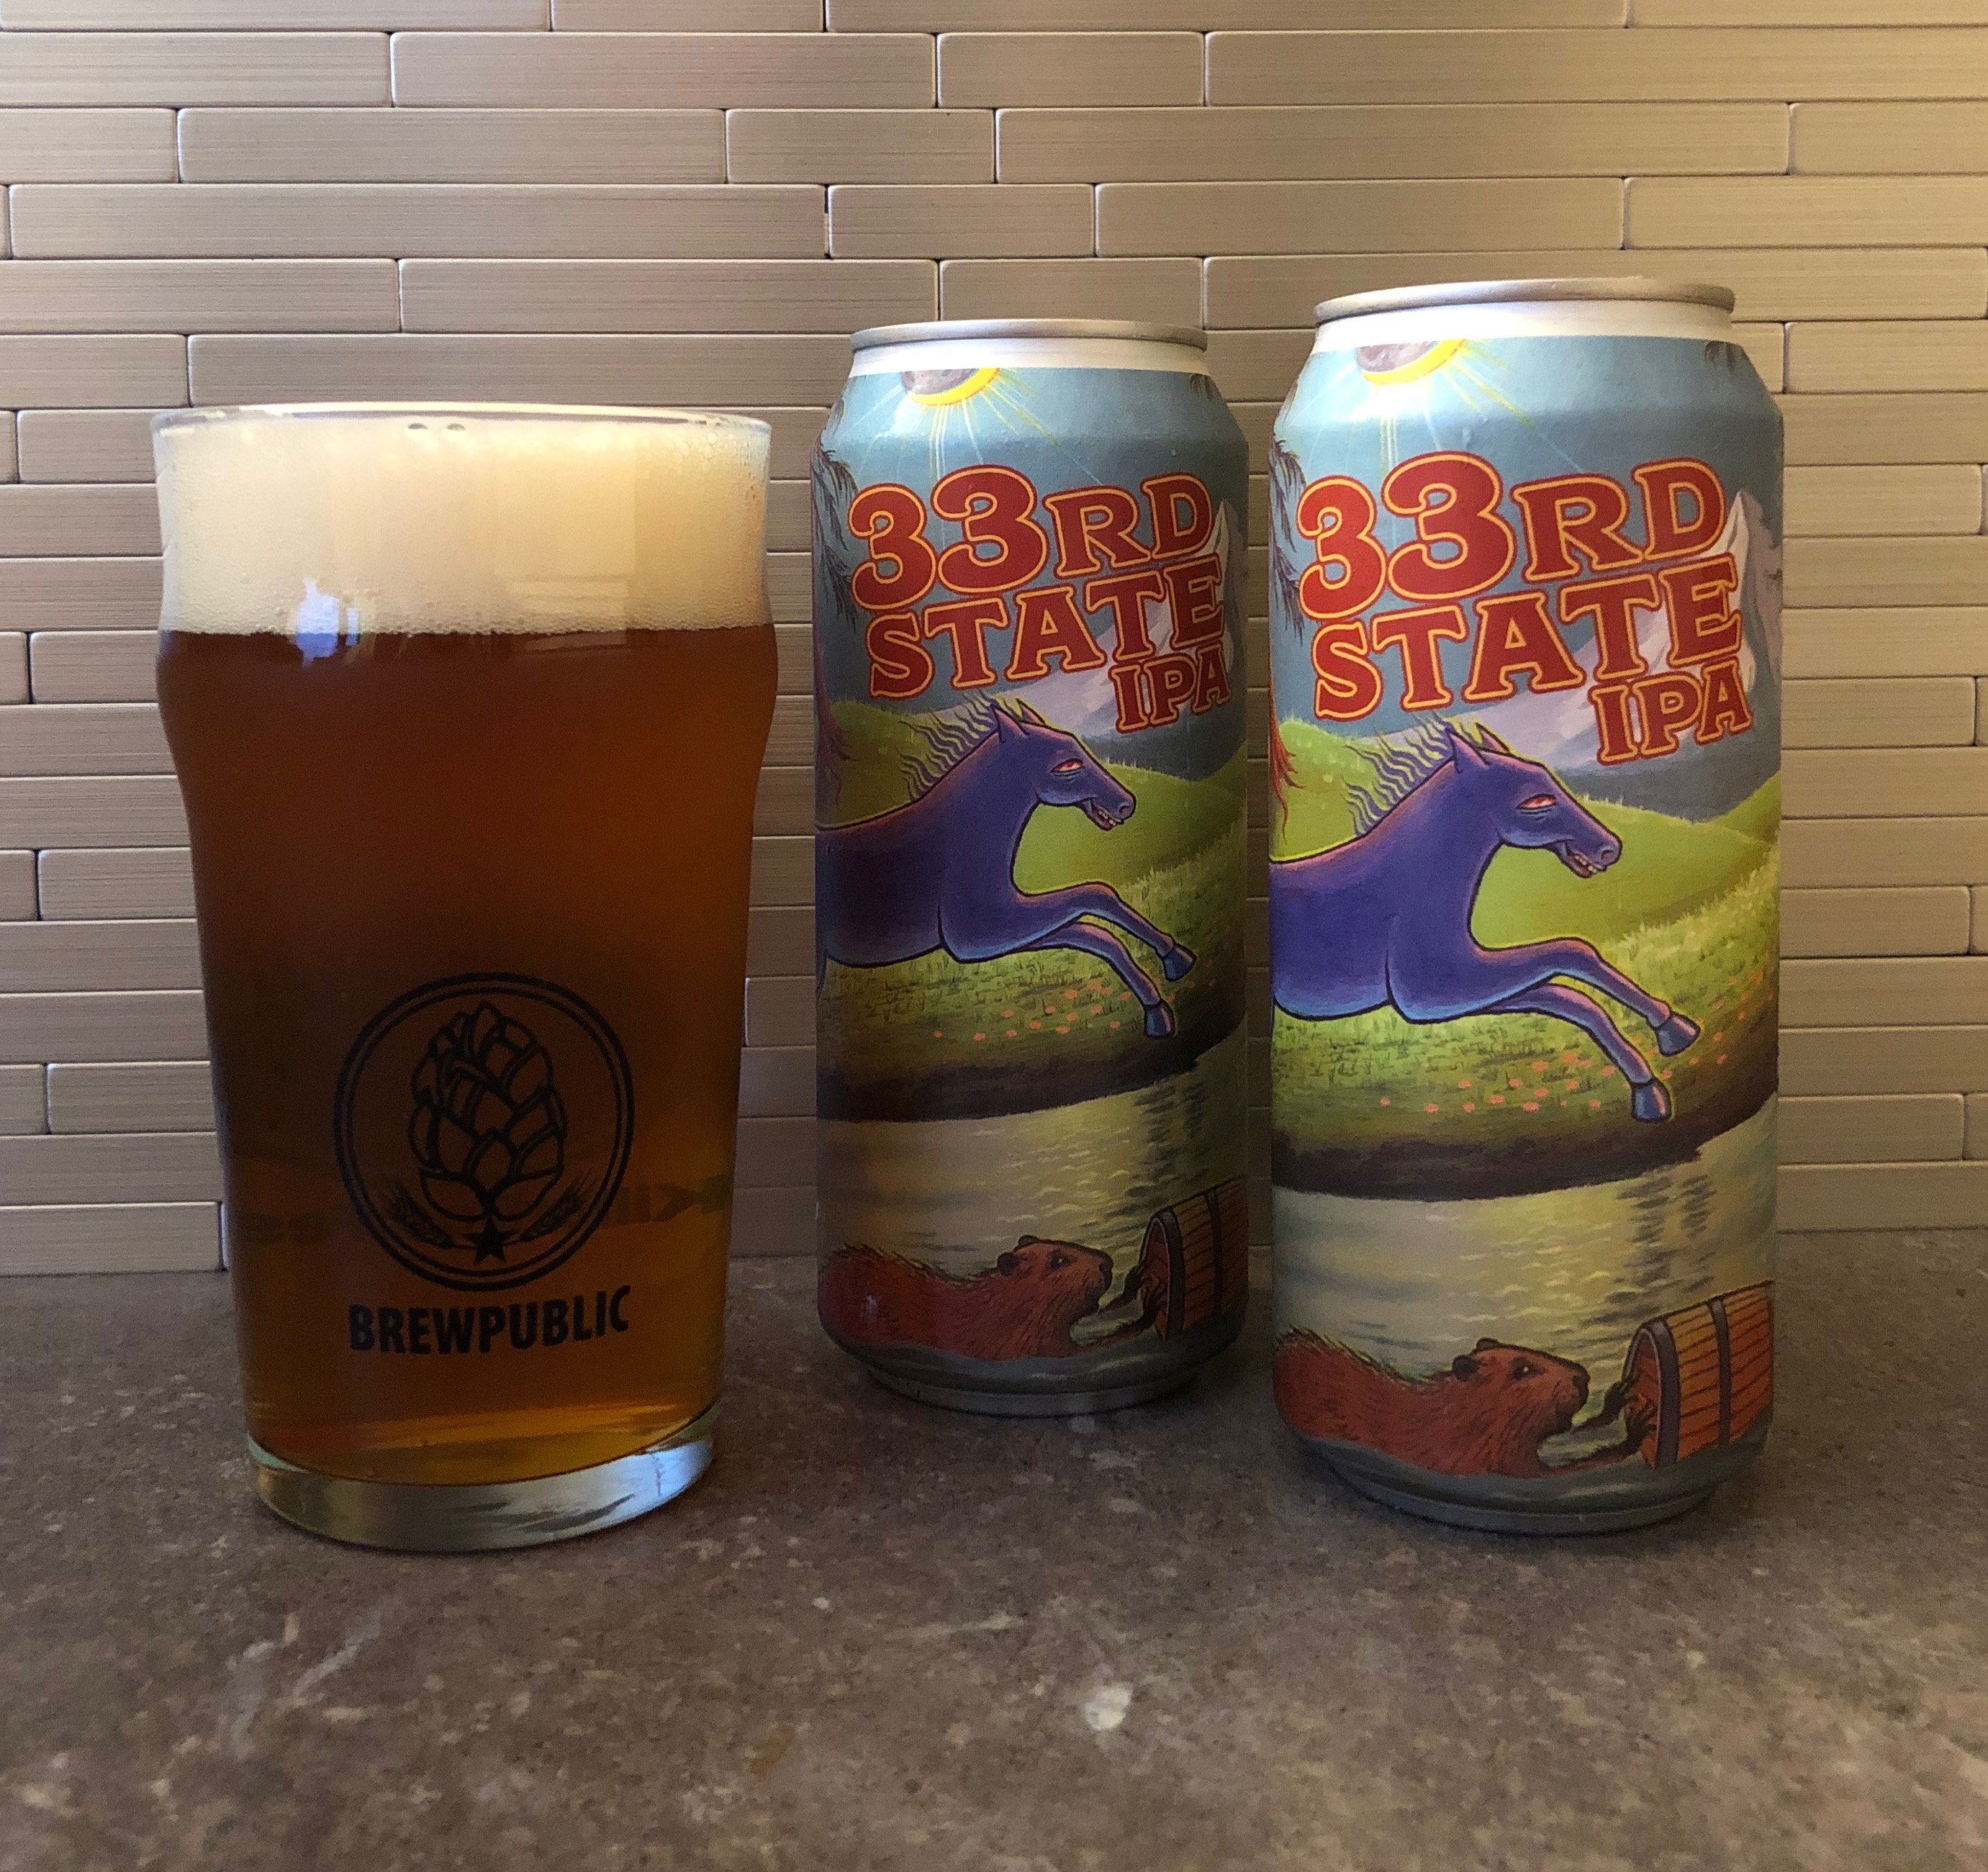 McMenamins new 33rd State IPA, a Northwest style IPA is now available in 16oz cans.